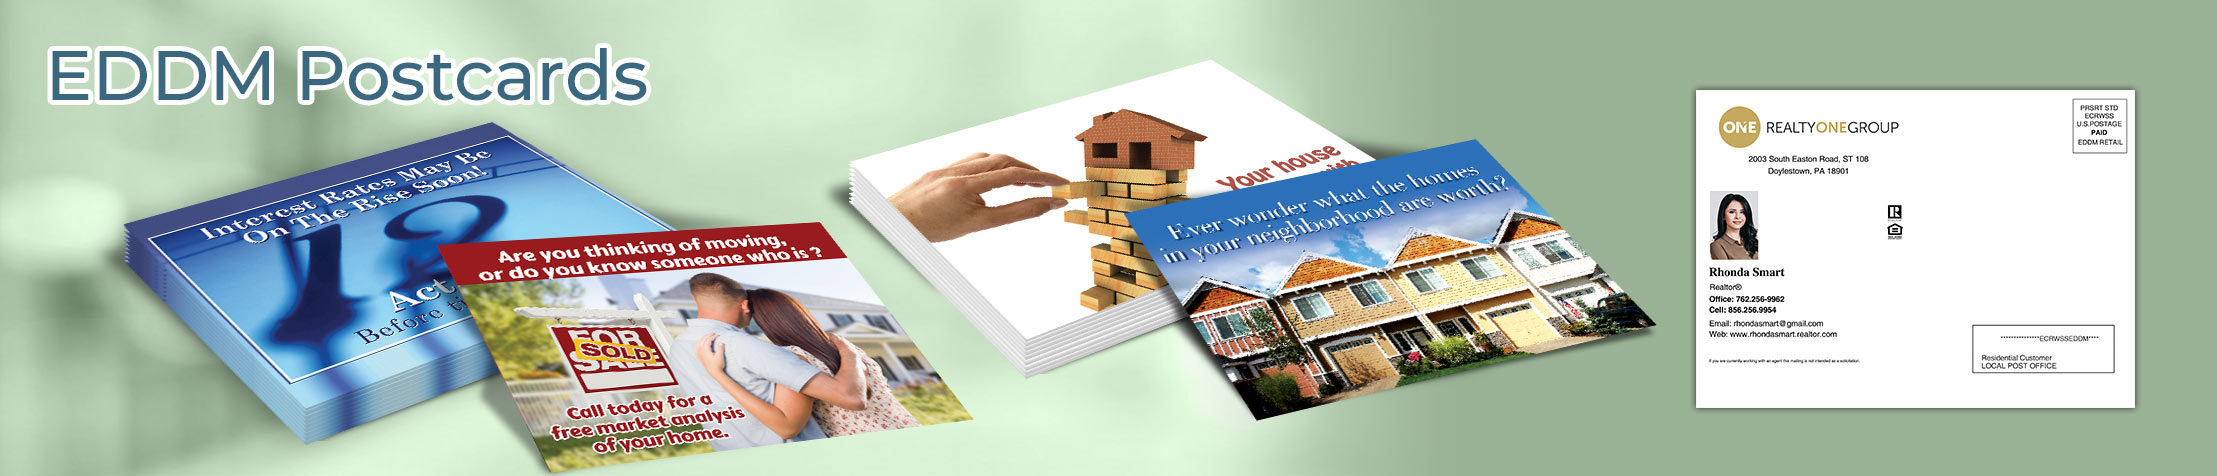 Realty One Group Real Estate EDDM Postcards - personalized Every Door Direct Mail Postcards | BestPrintBuy.com